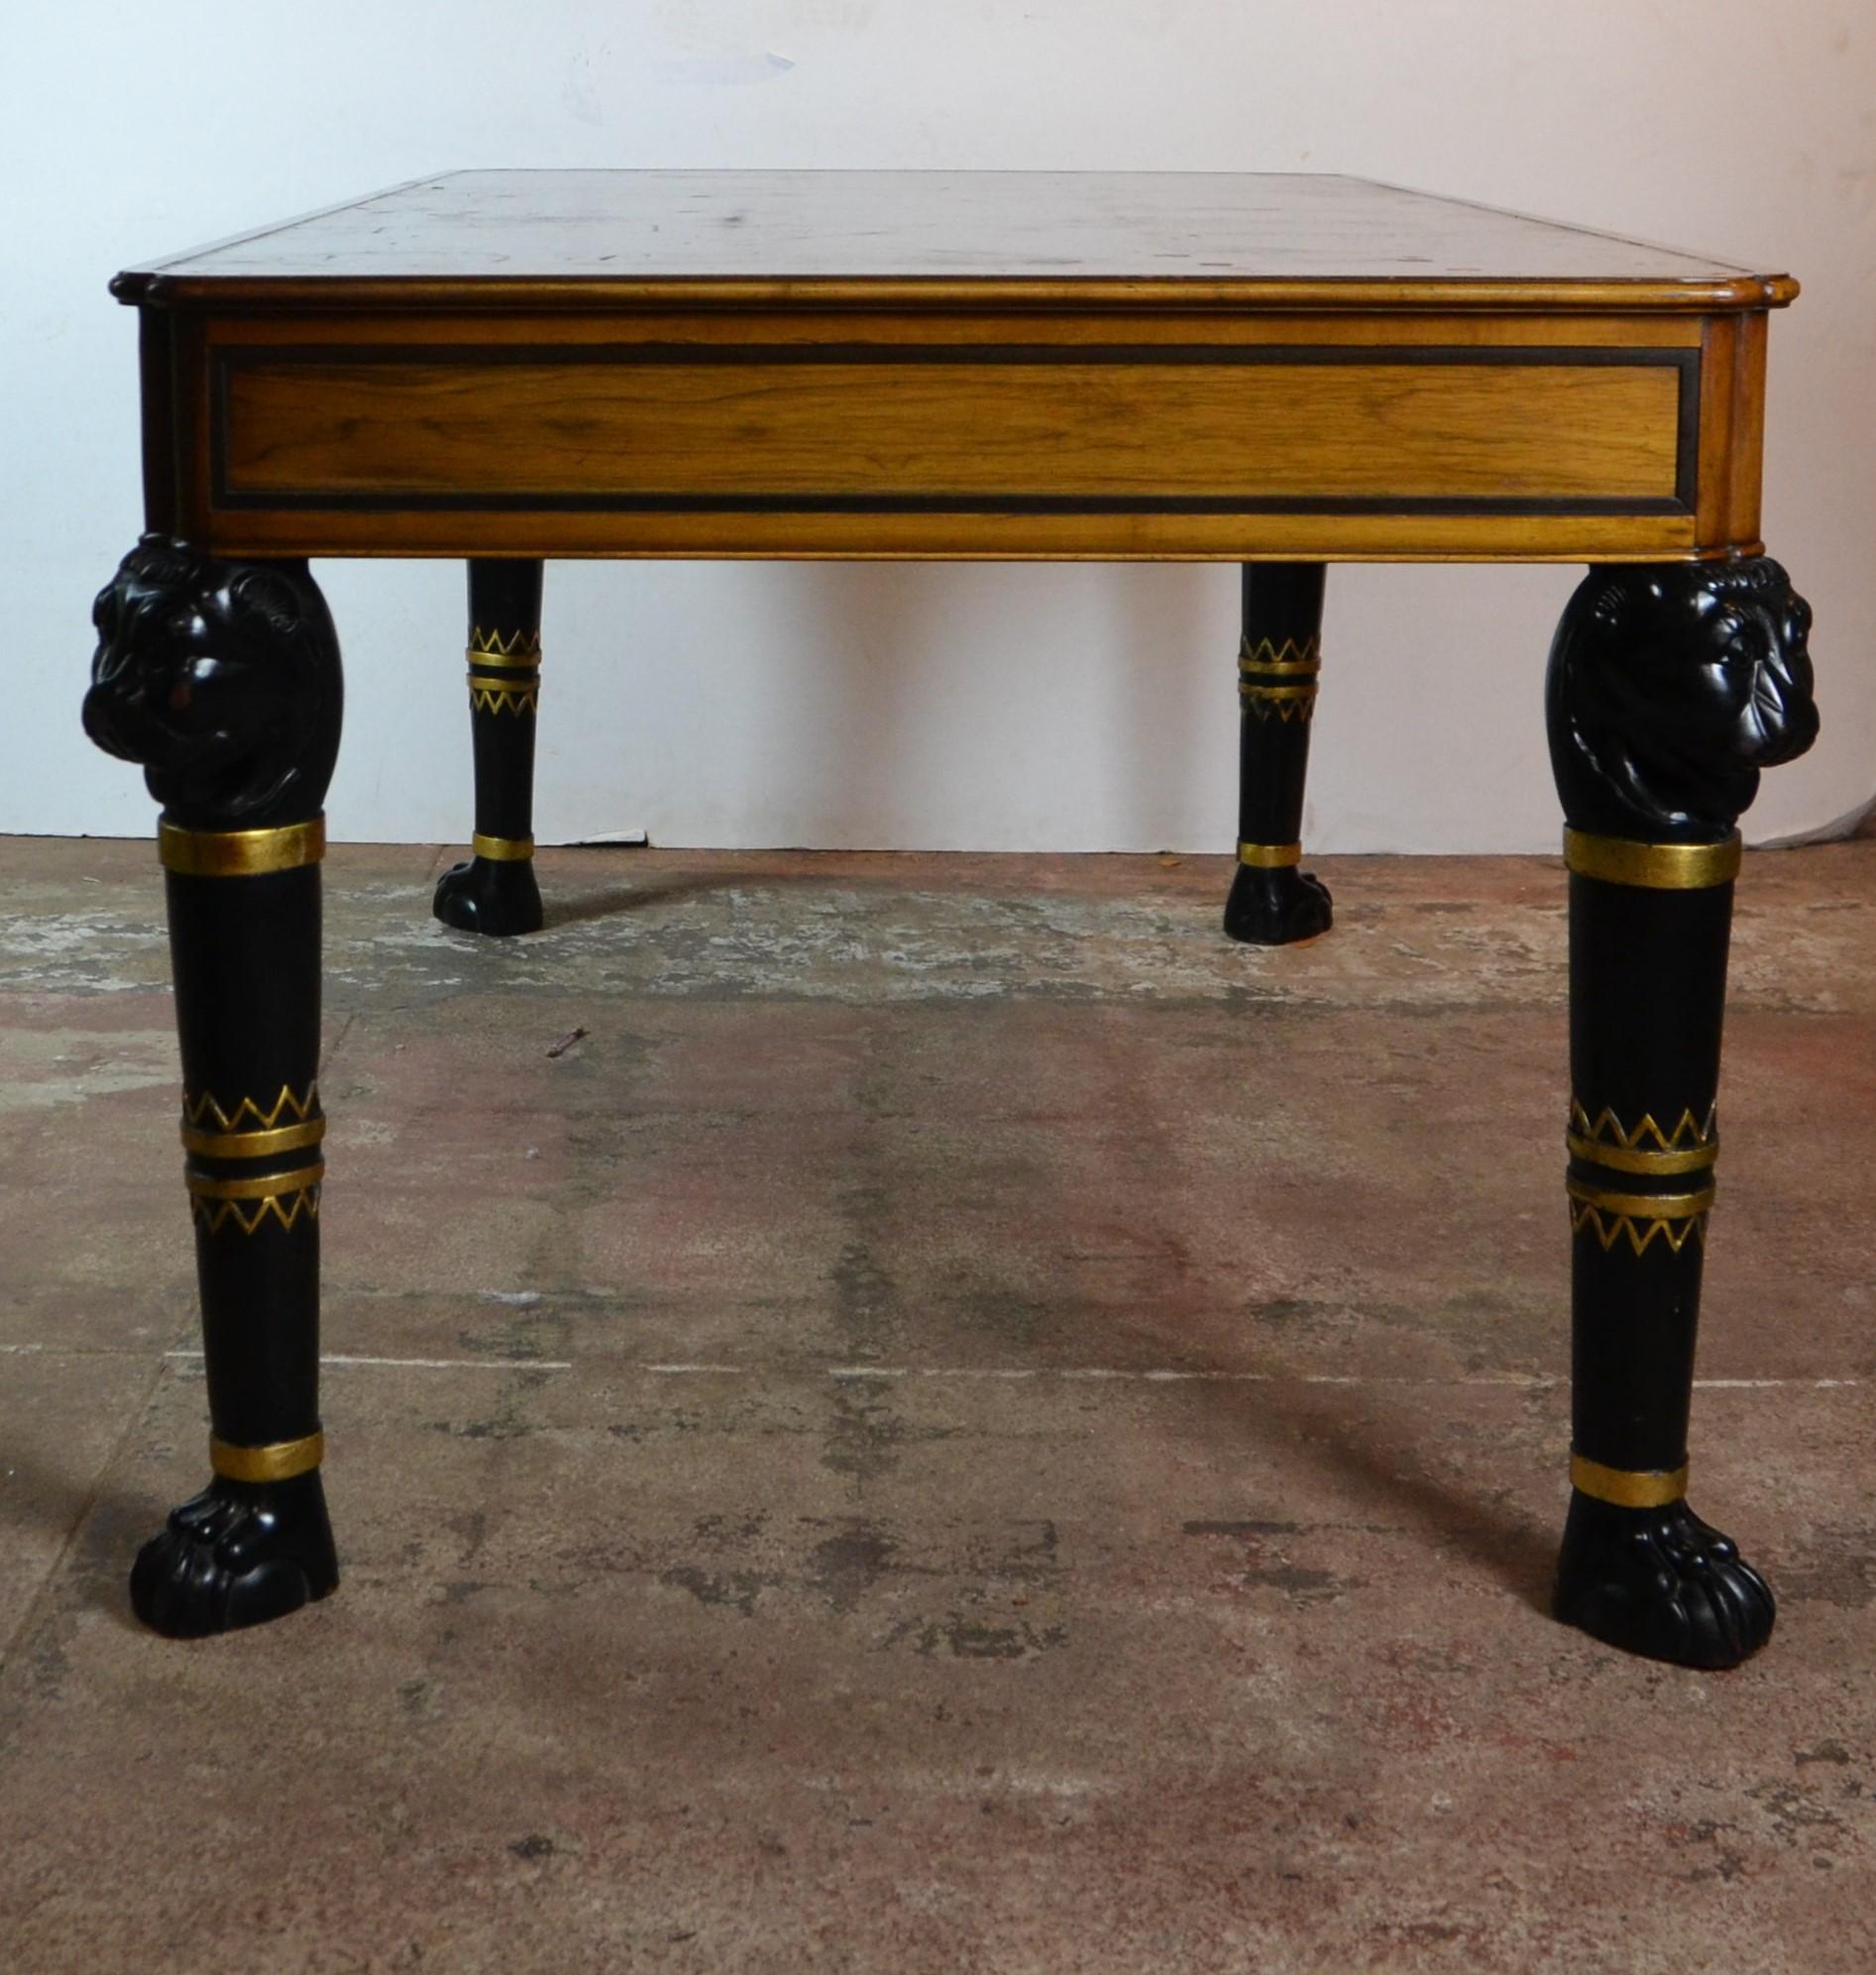 Egyptian Revival Leather Top Desk by Baker 1